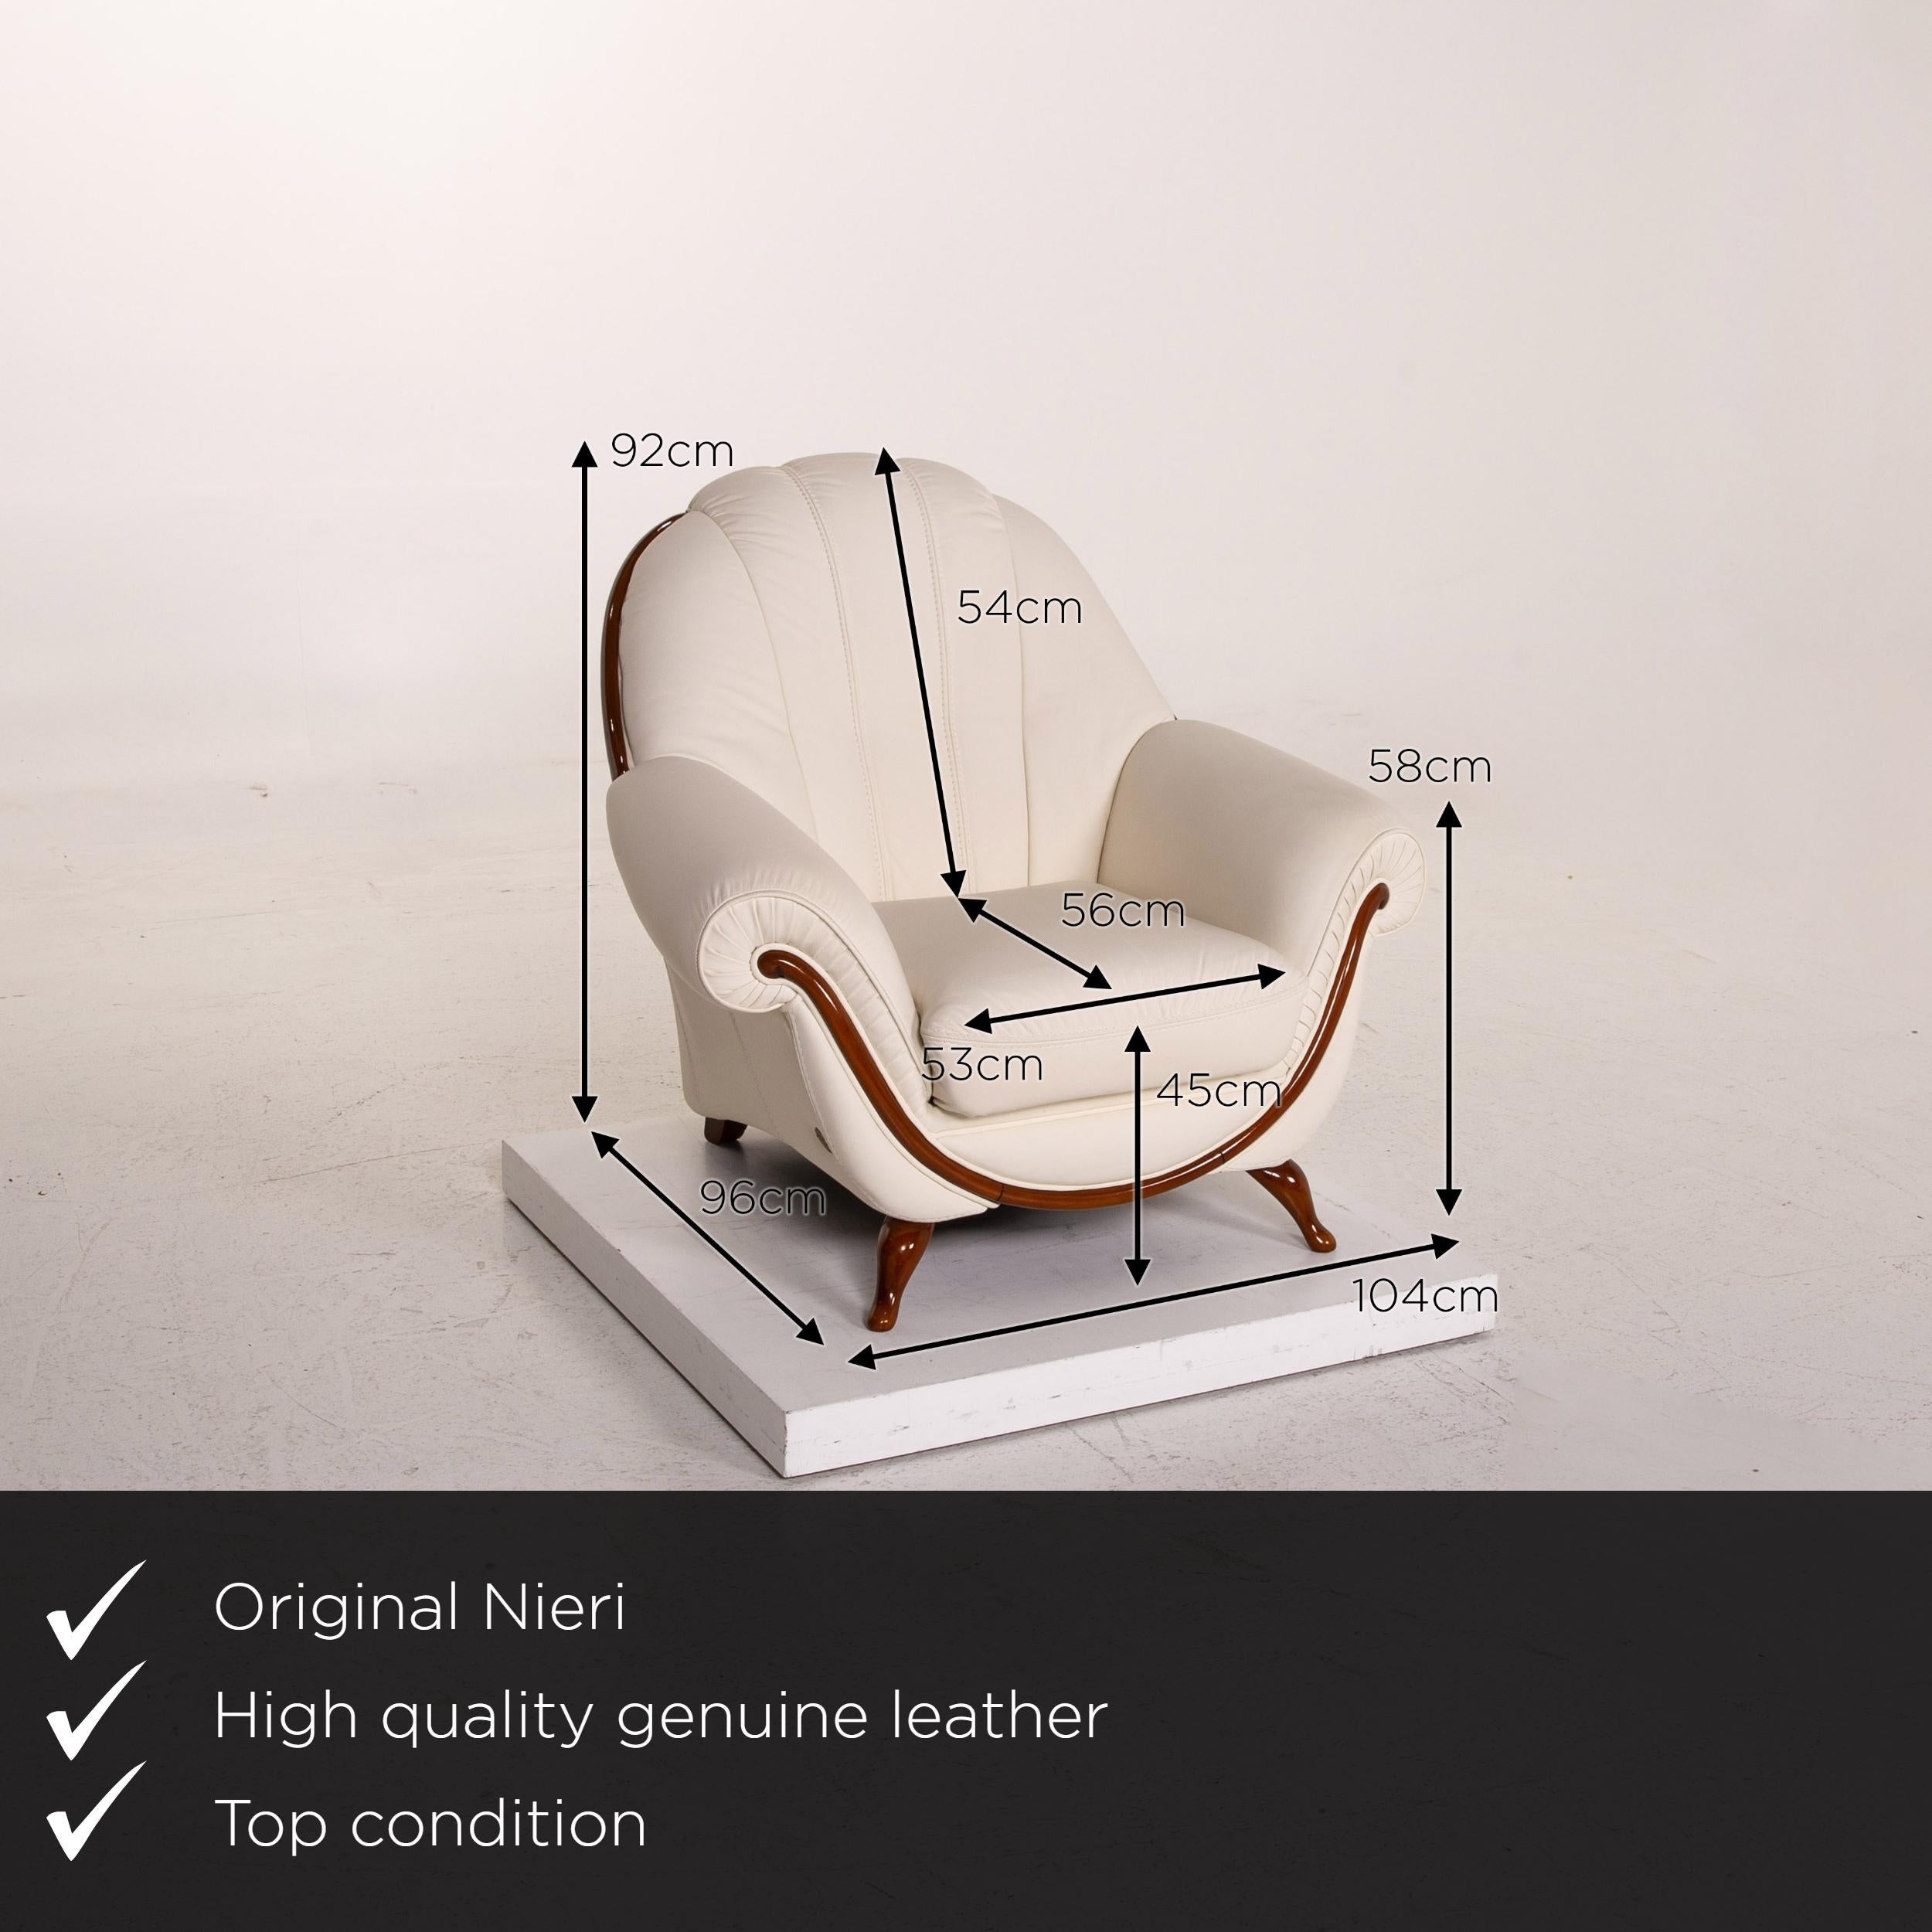 We present to you a Nieri leather armchair cream.


 Product measurements in centimeters:
 

Depth 96
Width 104
Height 92
Seat height 45
Rest height 58
Seat depth 56
Seat width 53
Back height 54.
 